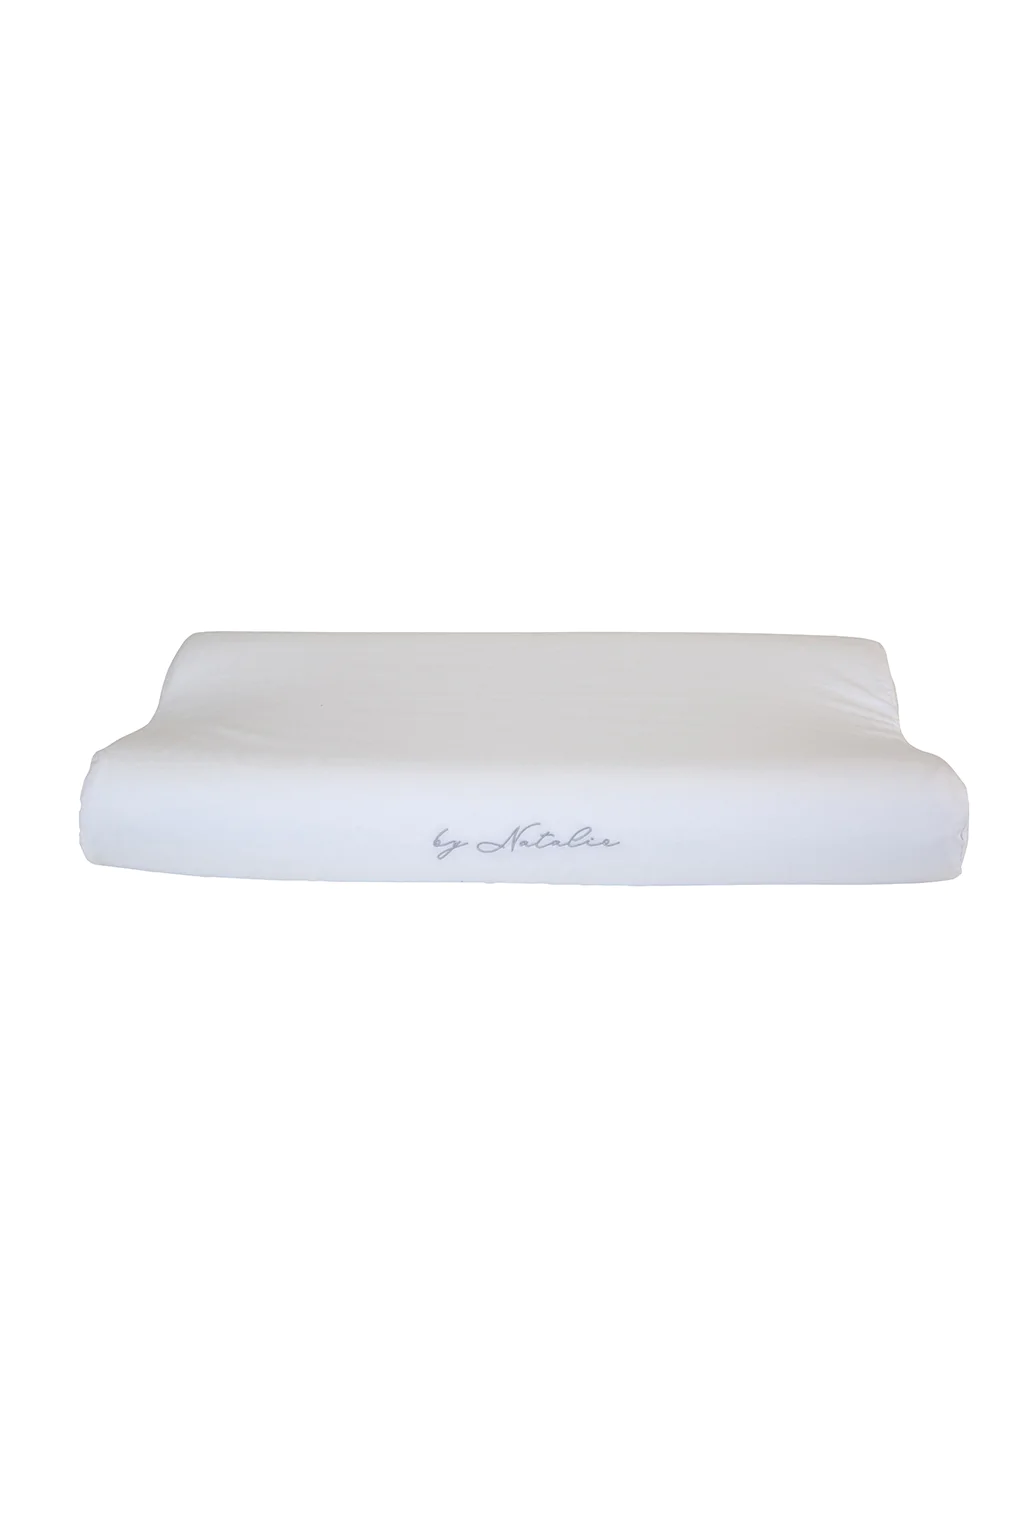 by Natalie Gel Infused Memory Foam Pillow - Contoured